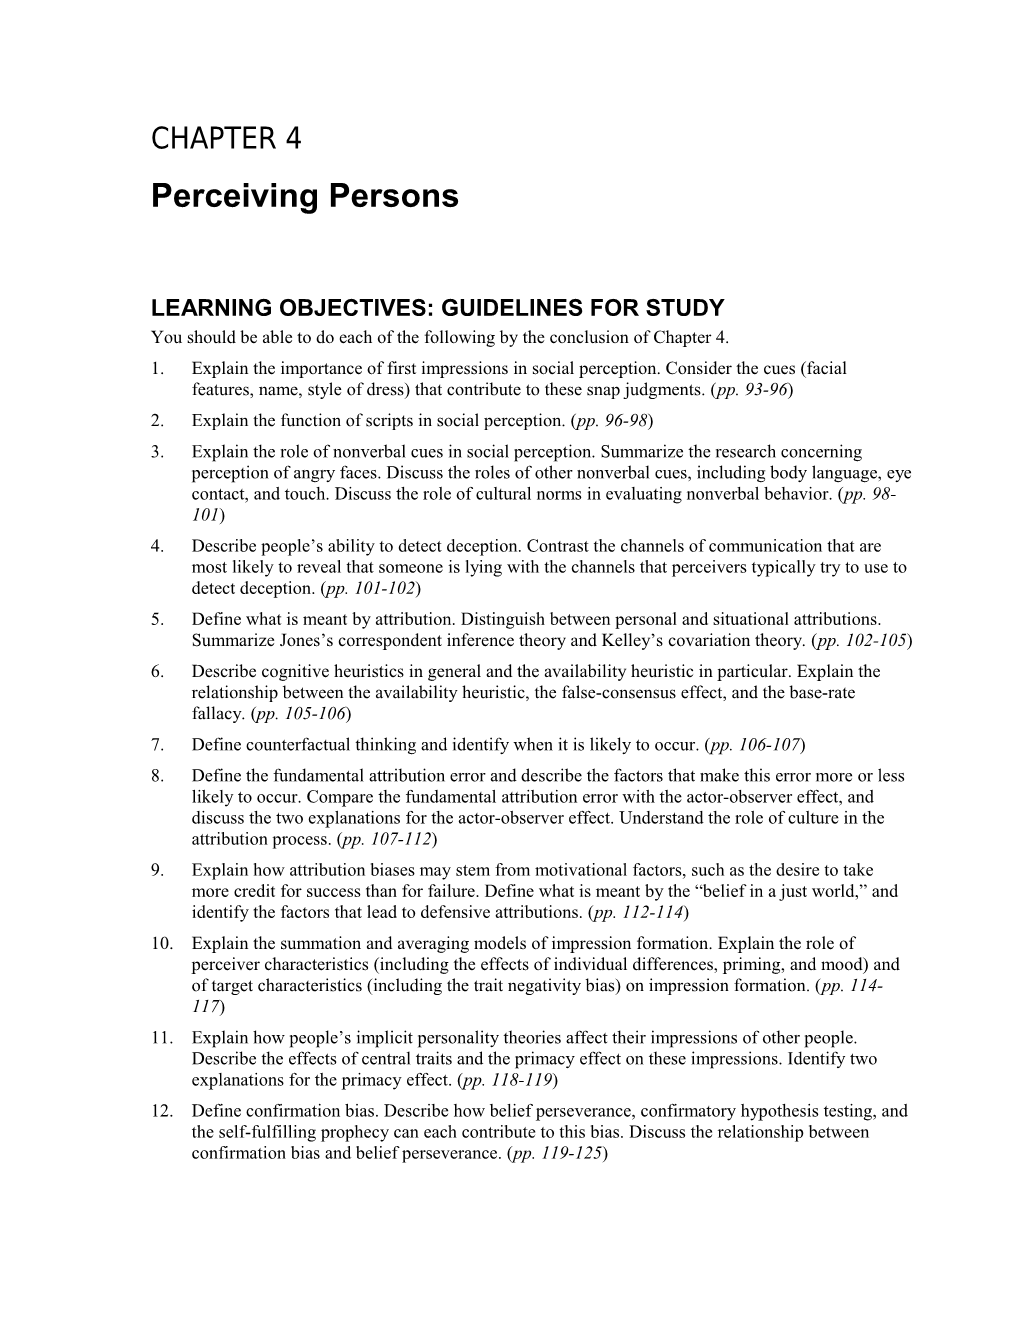 Learning Objectives: Guidelines for Study